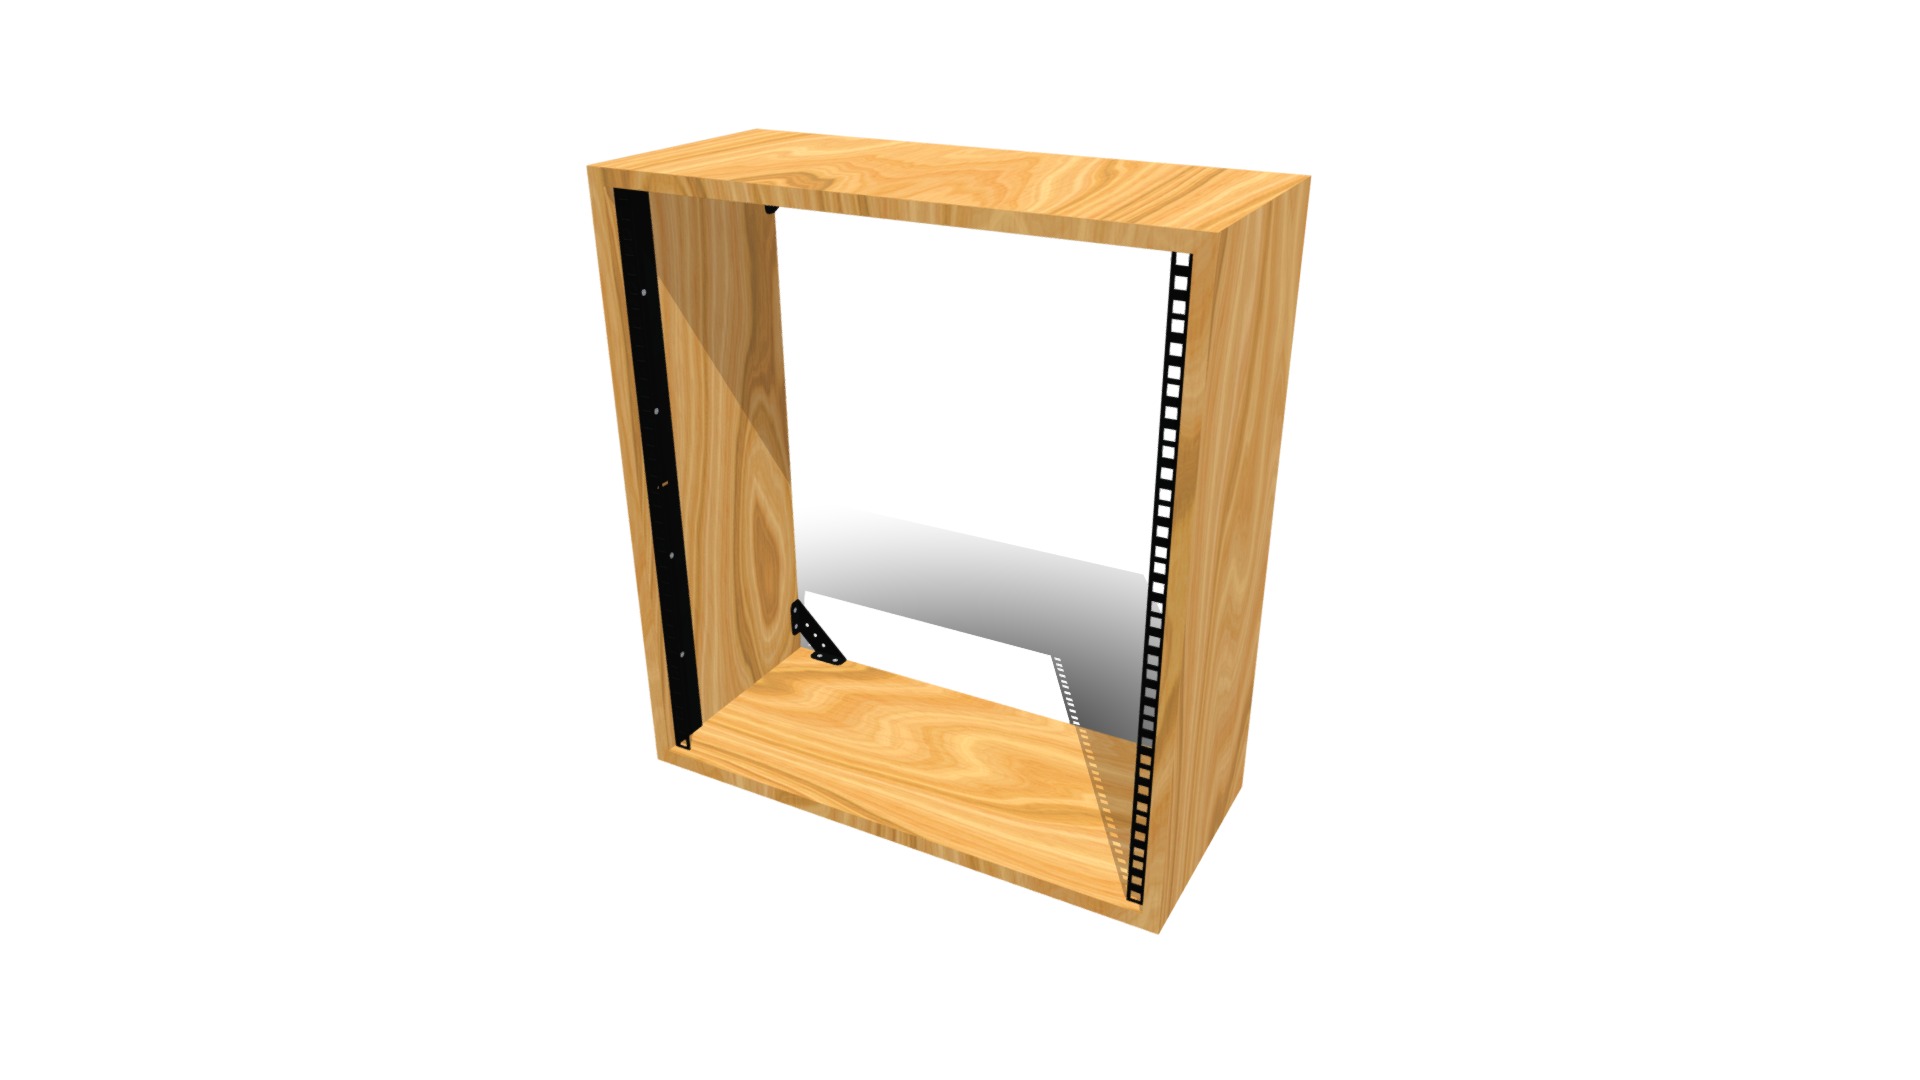 3D model 12RU Studio Wallbox - This is a 3D model of the 12RU Studio Wallbox. The 3D model is about a wooden box with a screen.